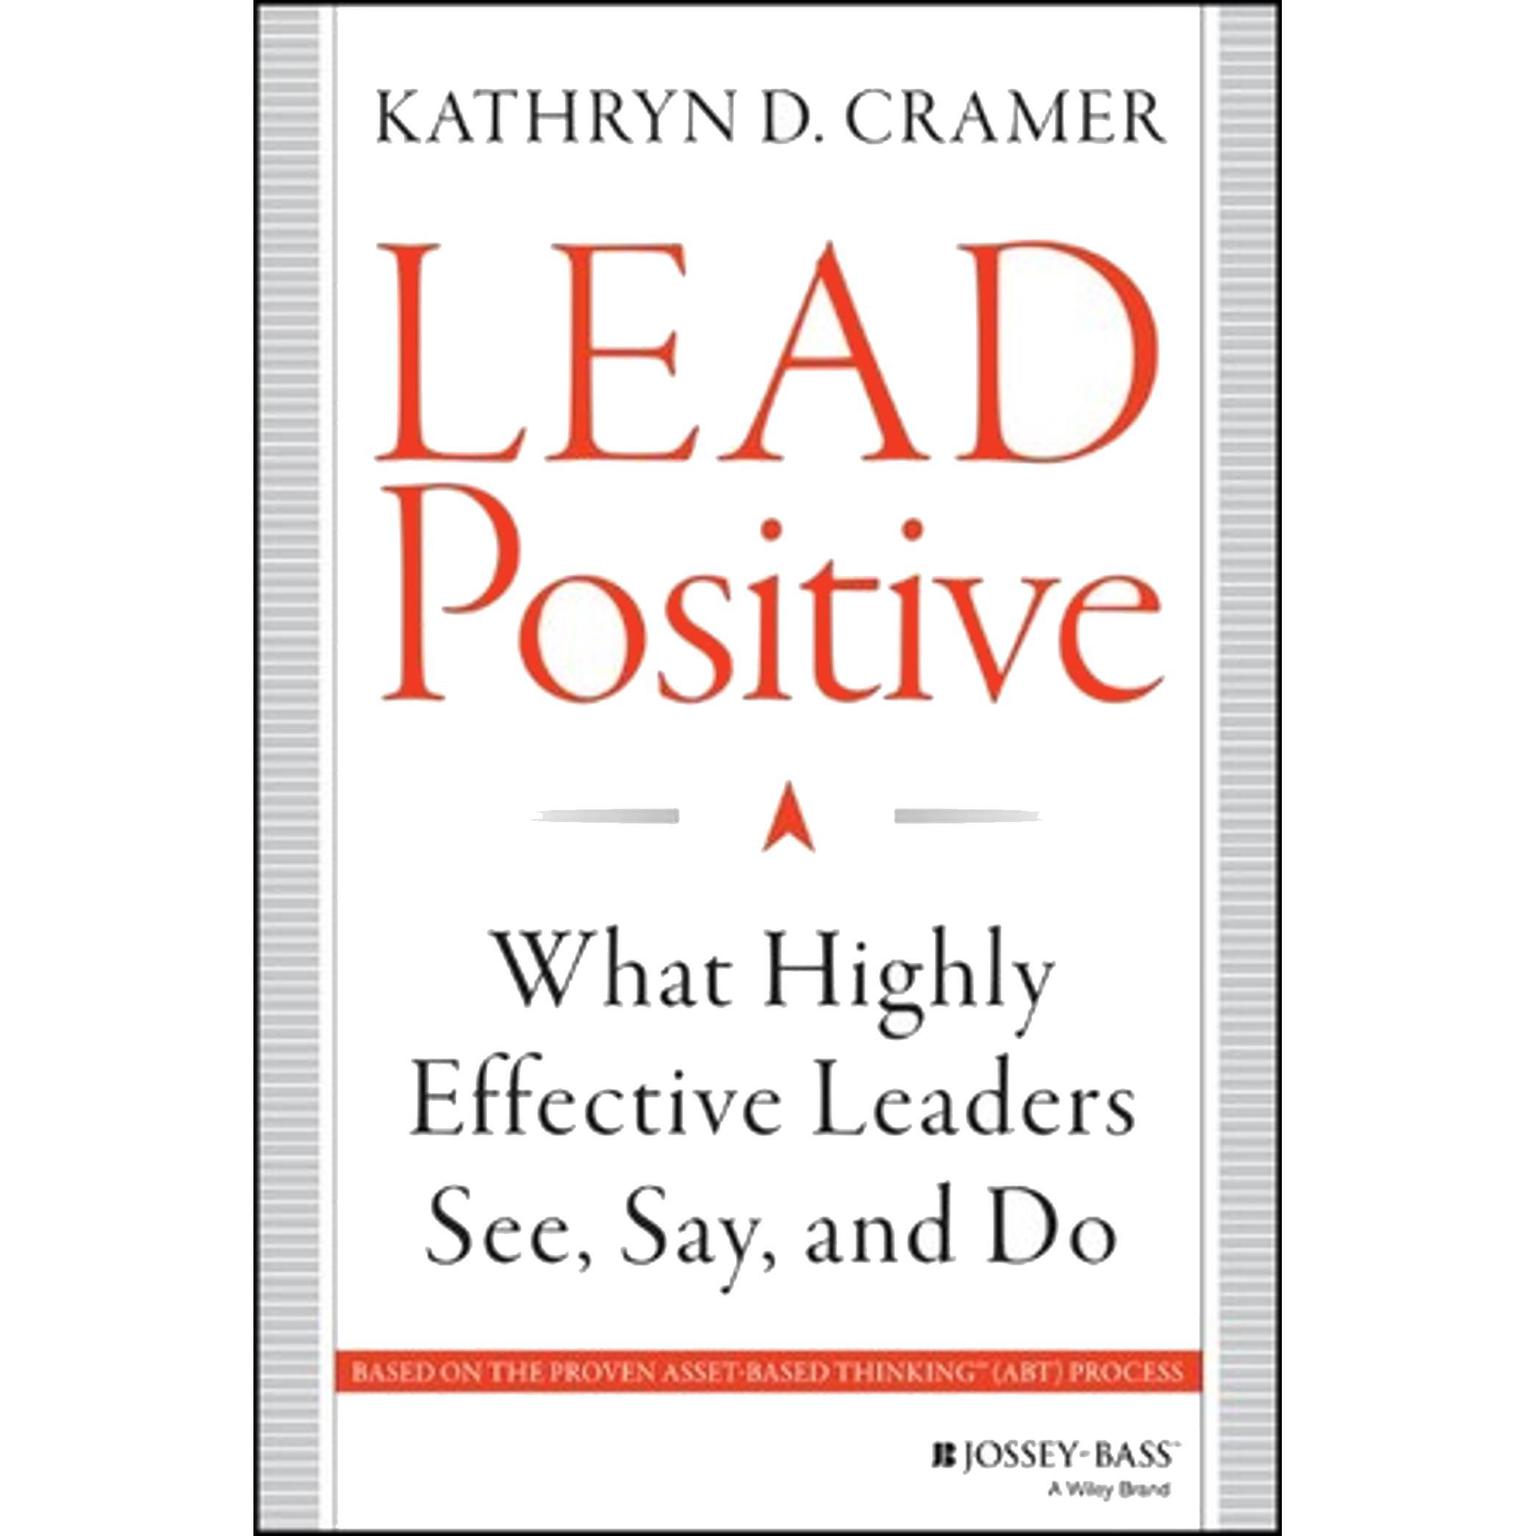 Lead Positive: What Highly Effective Leaders See, Say, and Do Audiobook, by Kathryn D. Cramer